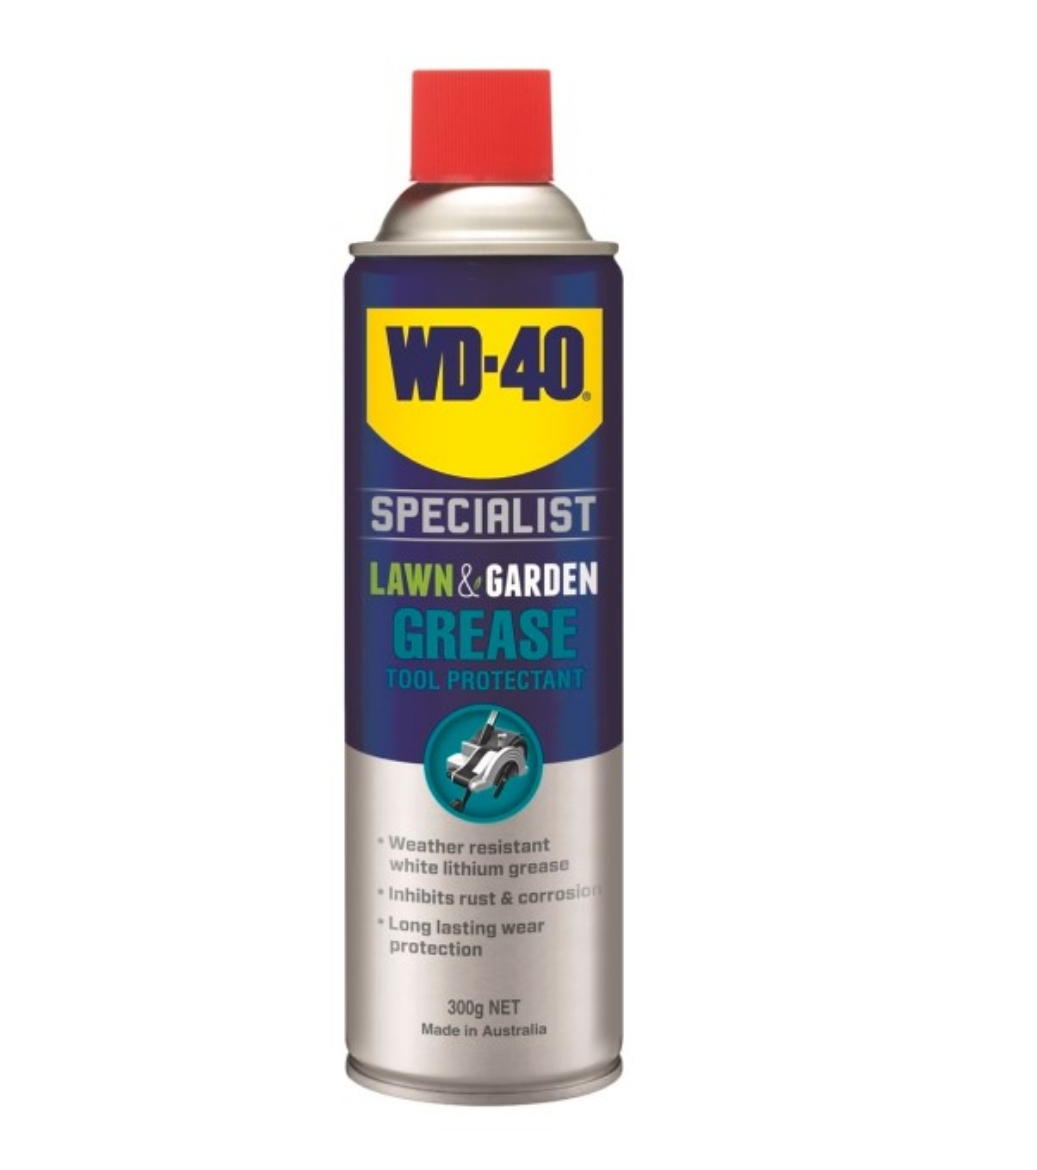 Picture of WD-40 Specialist Lawn & Garden Tool Protectant Grease 300g